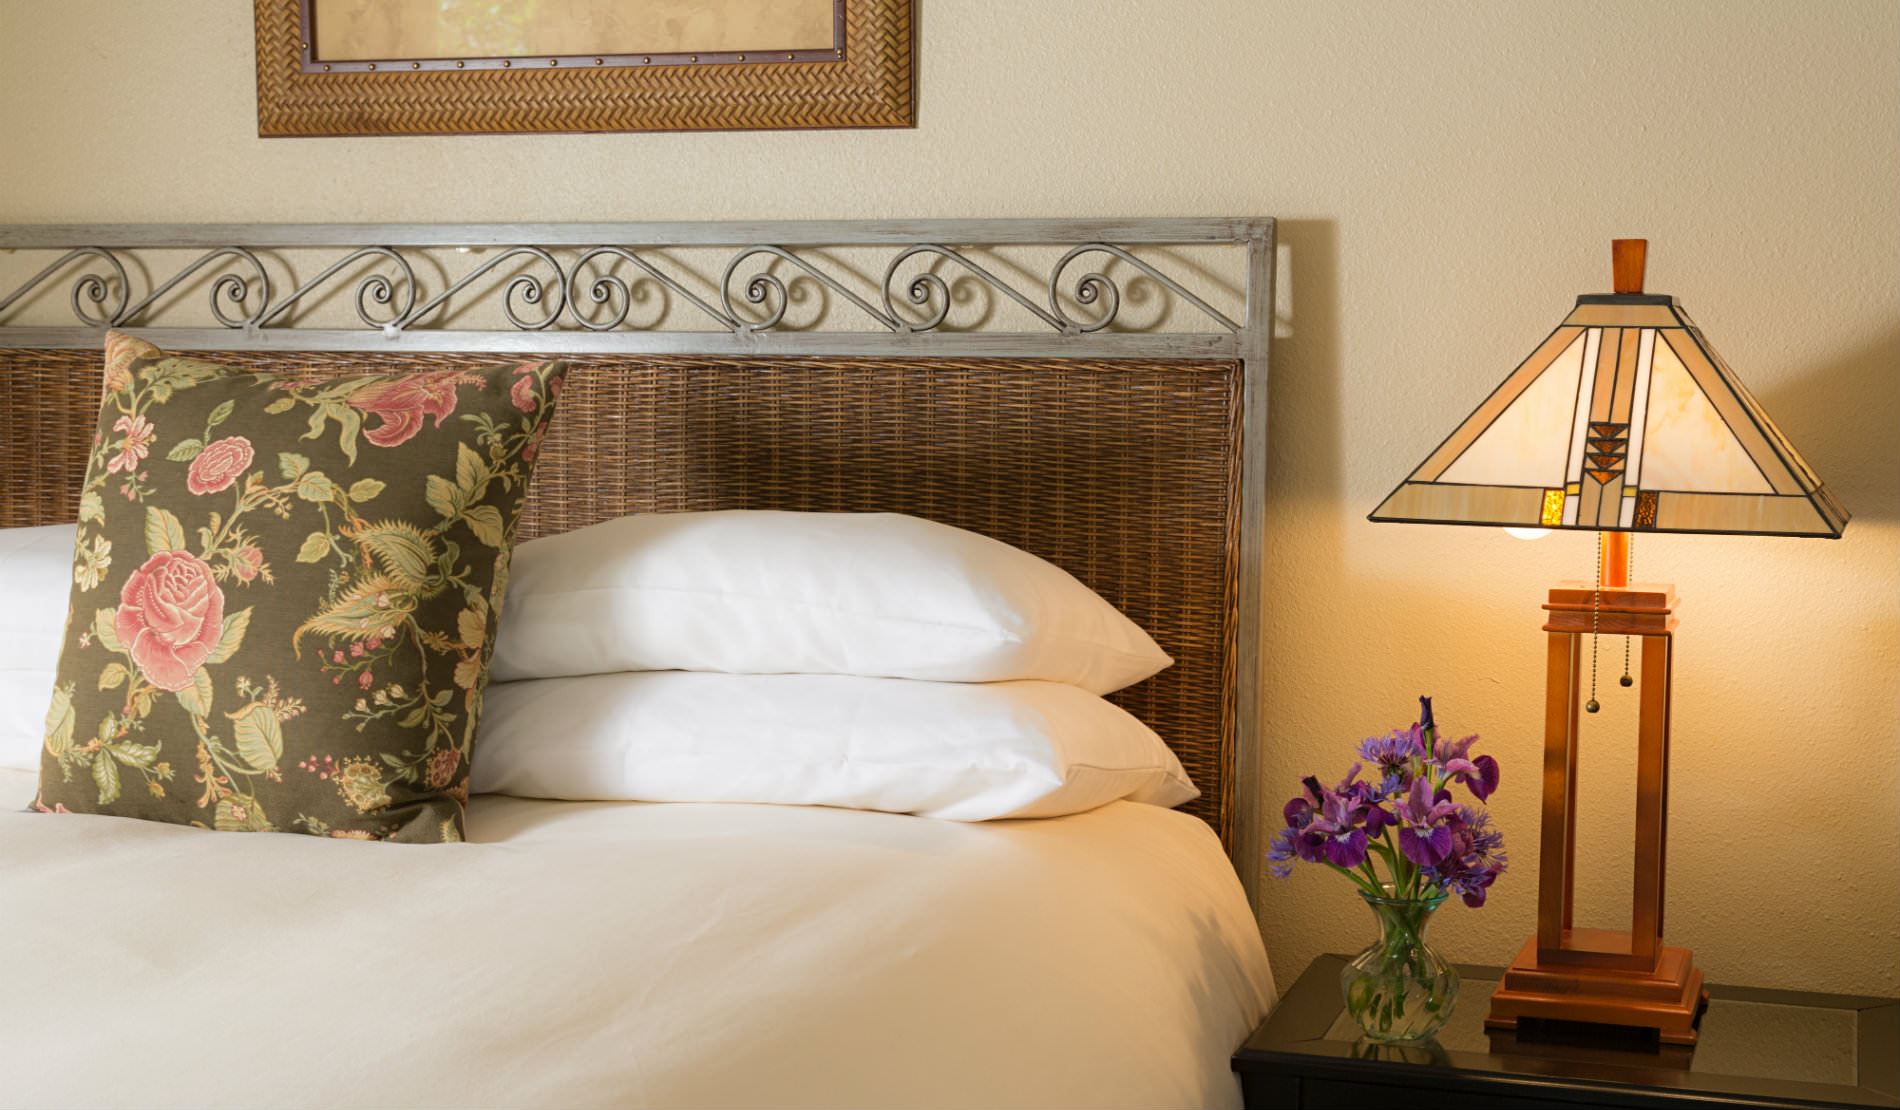 Soft white bedding and pillows on bed next to sidetable with craftsman-style lamp and purple flowers.